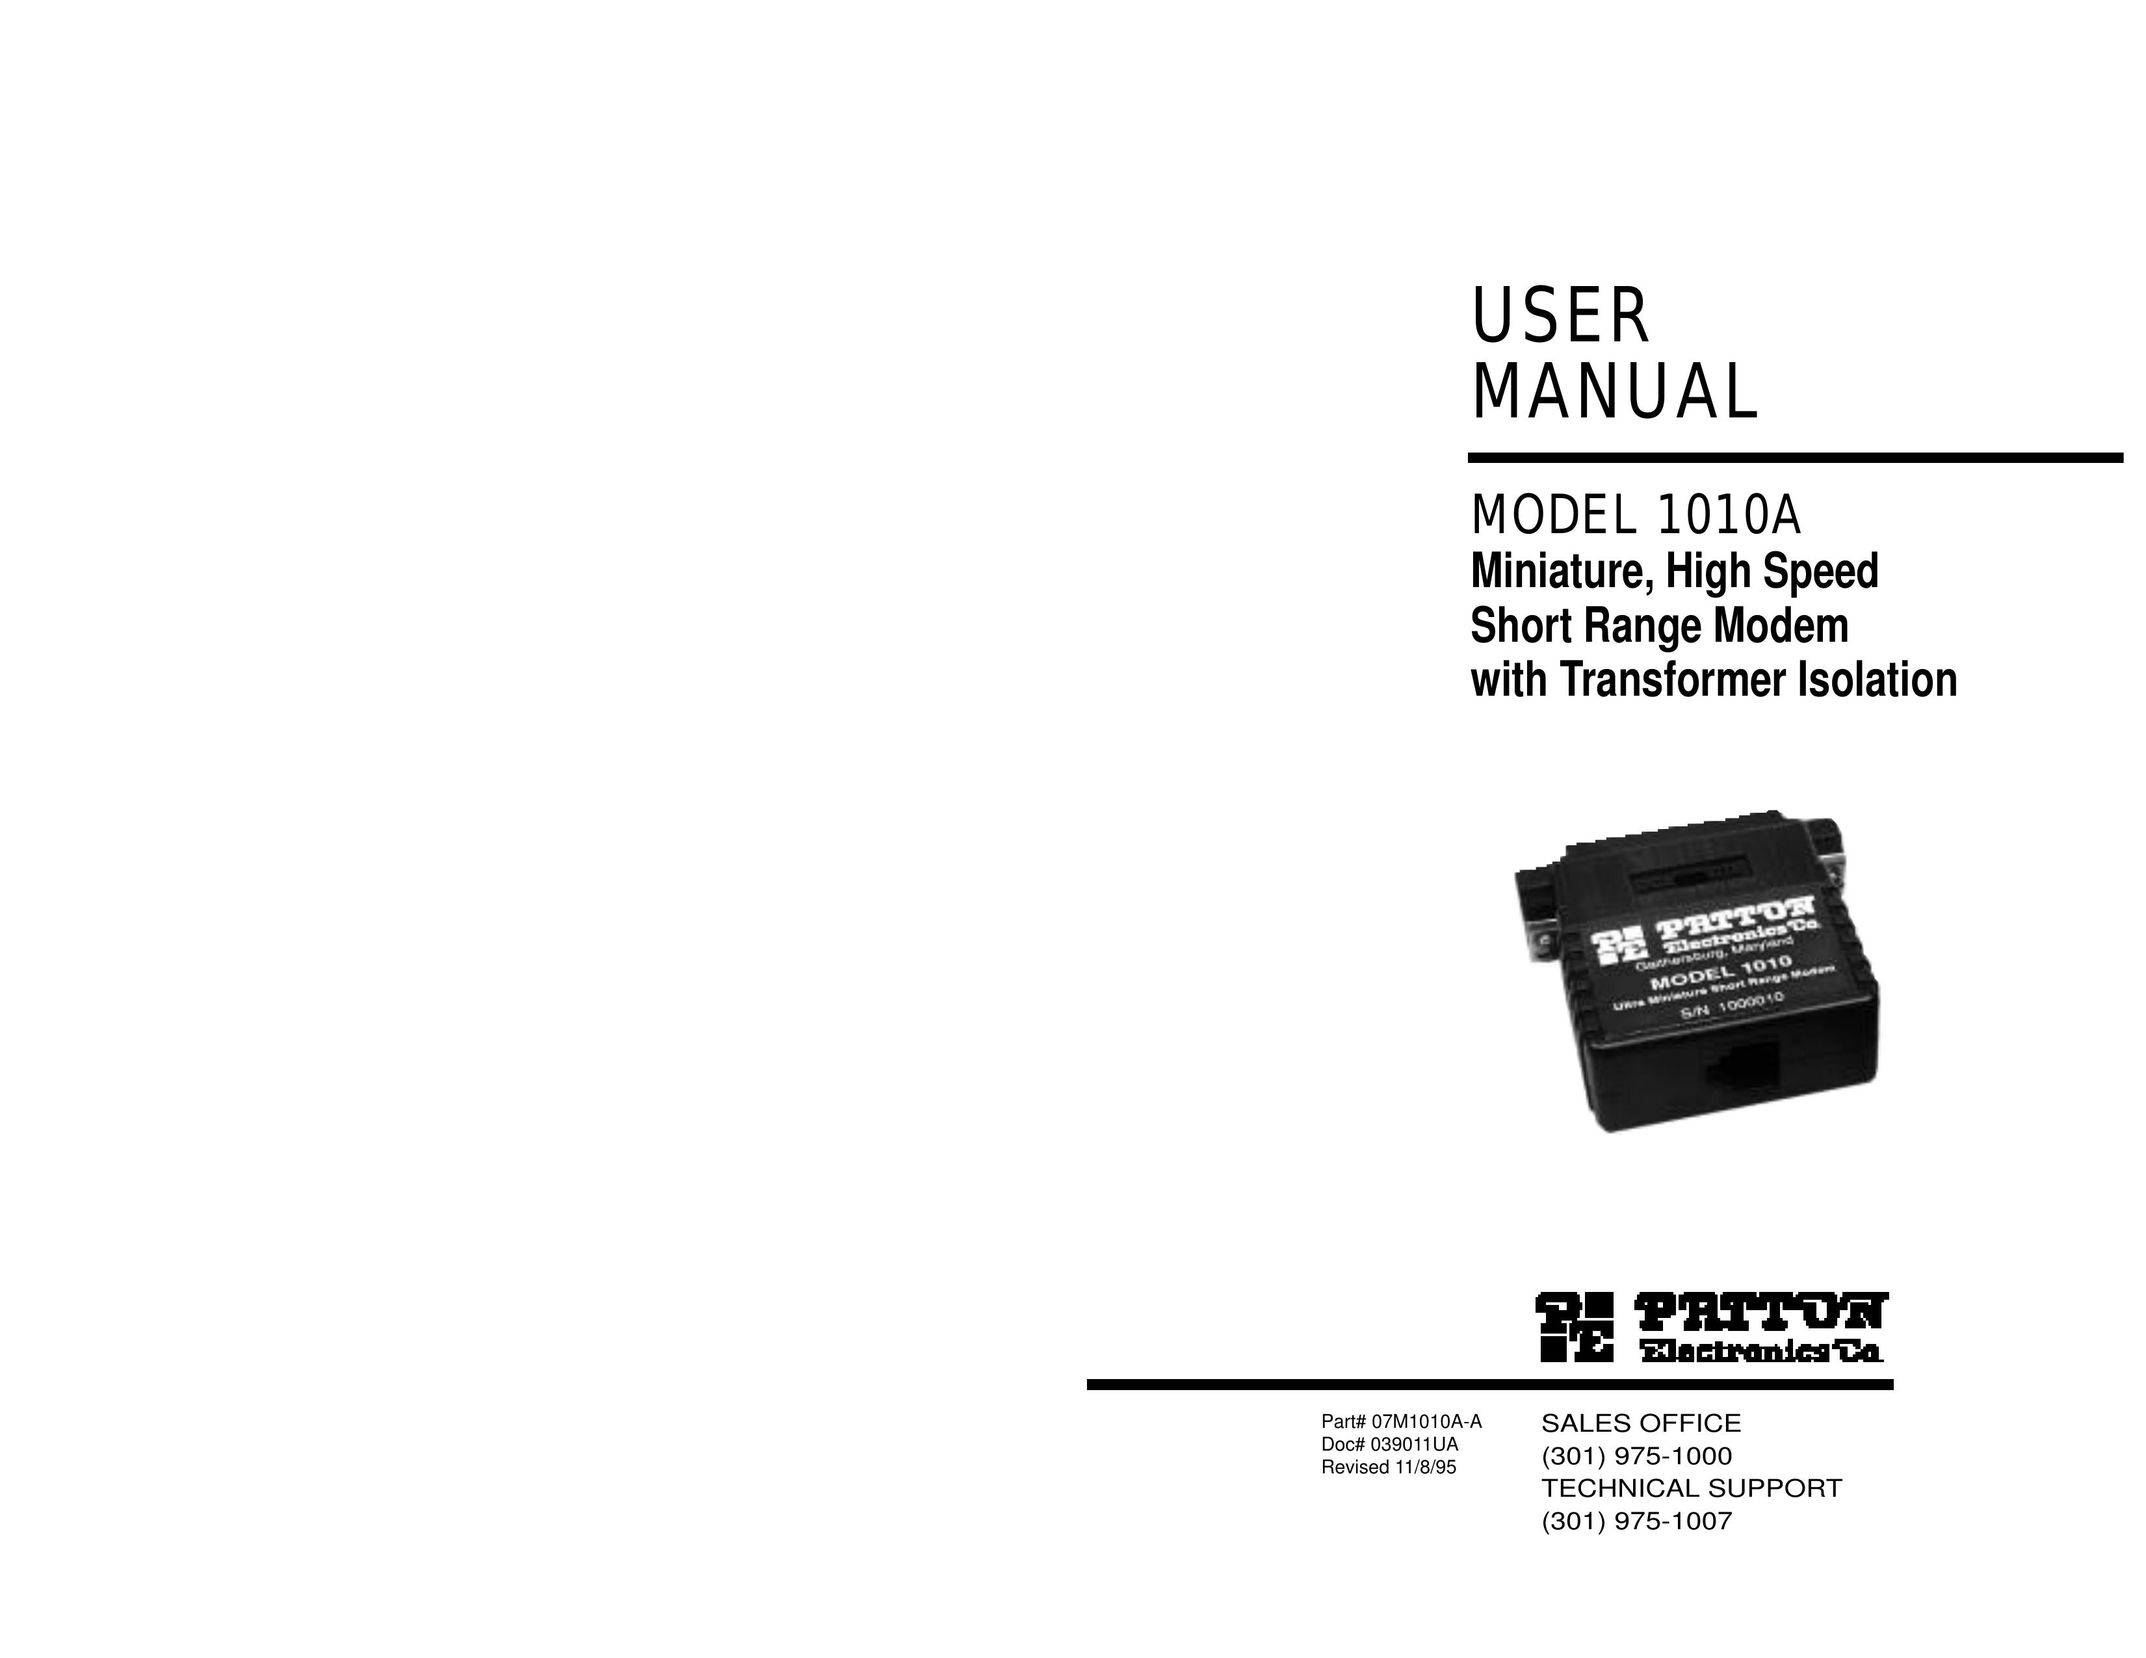 Patton electronic 1010A Network Card User Manual